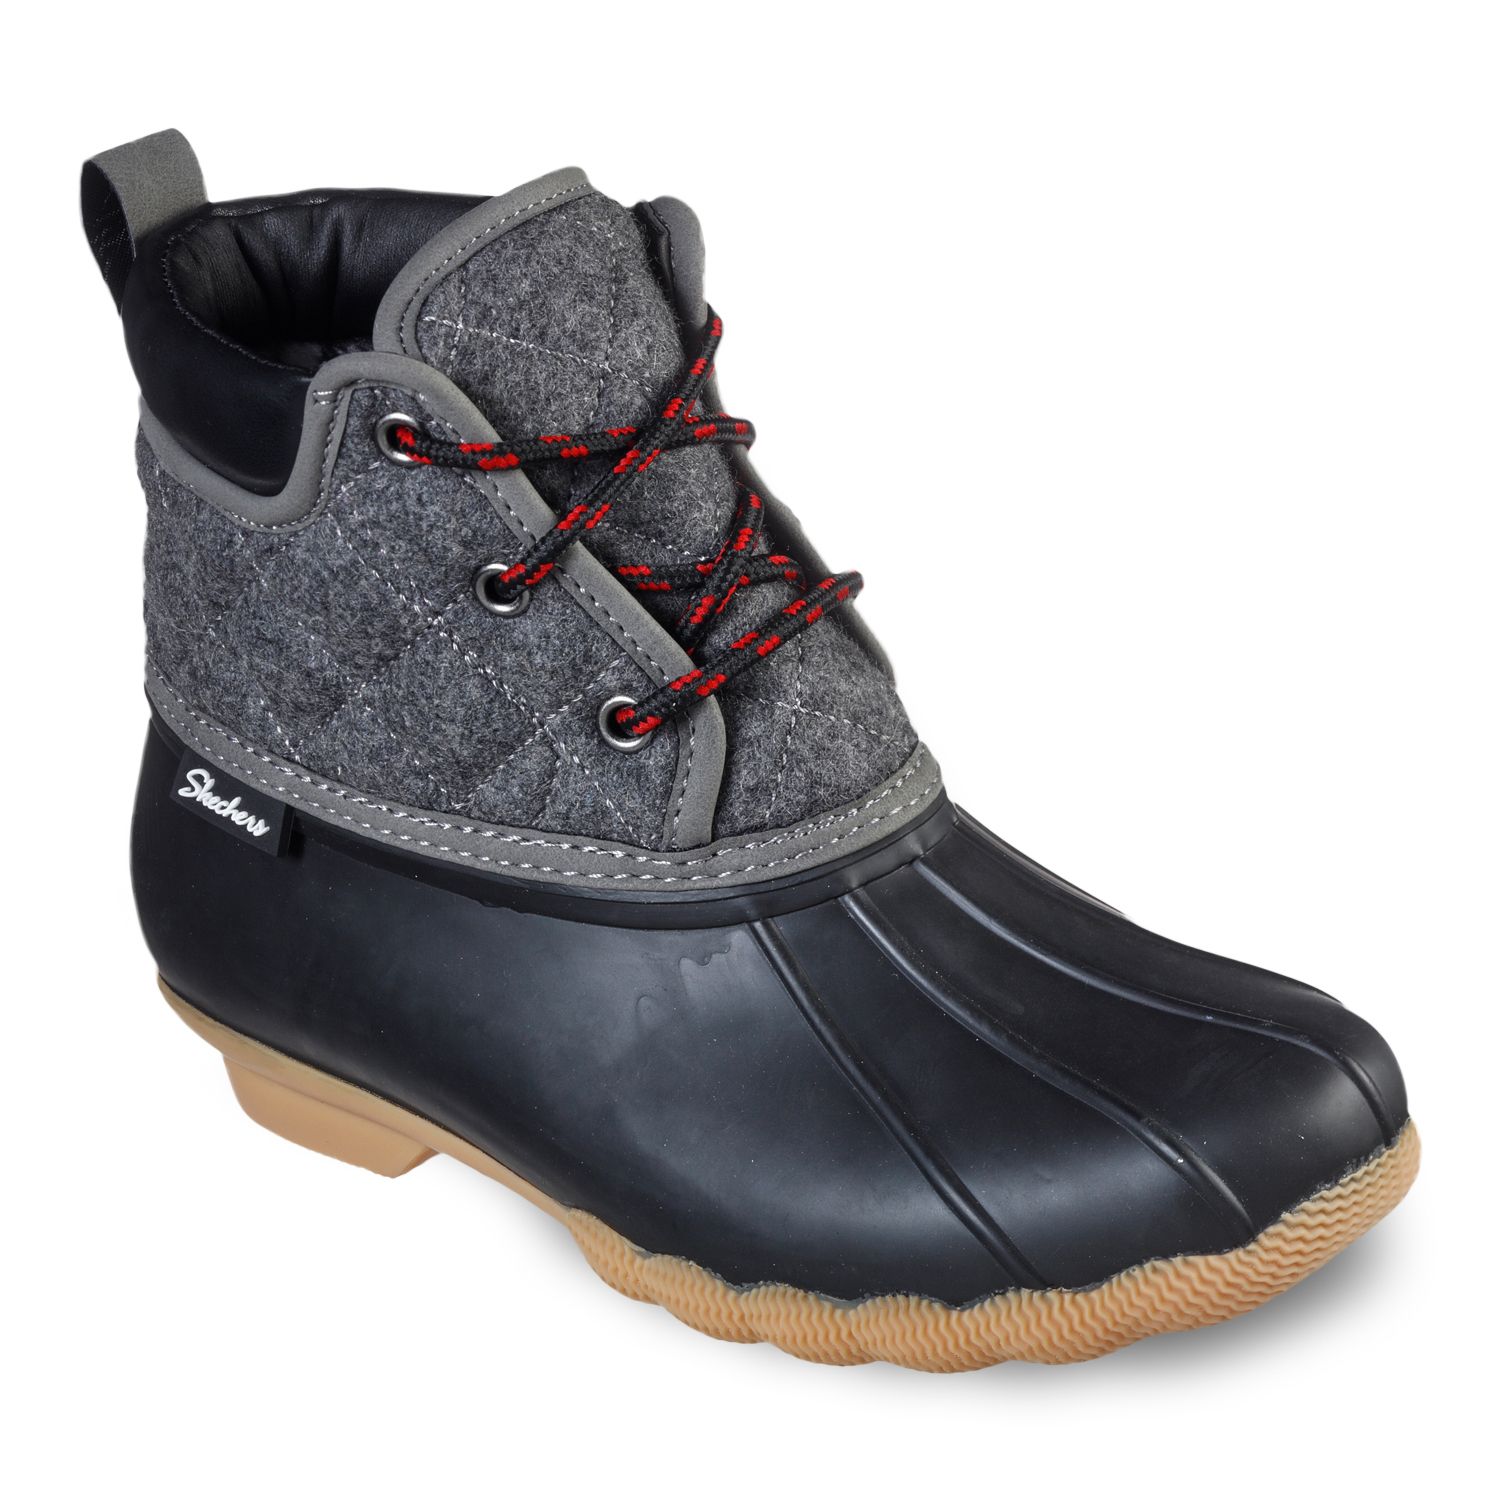 Pond Lil Puddles Women's Duck Boots